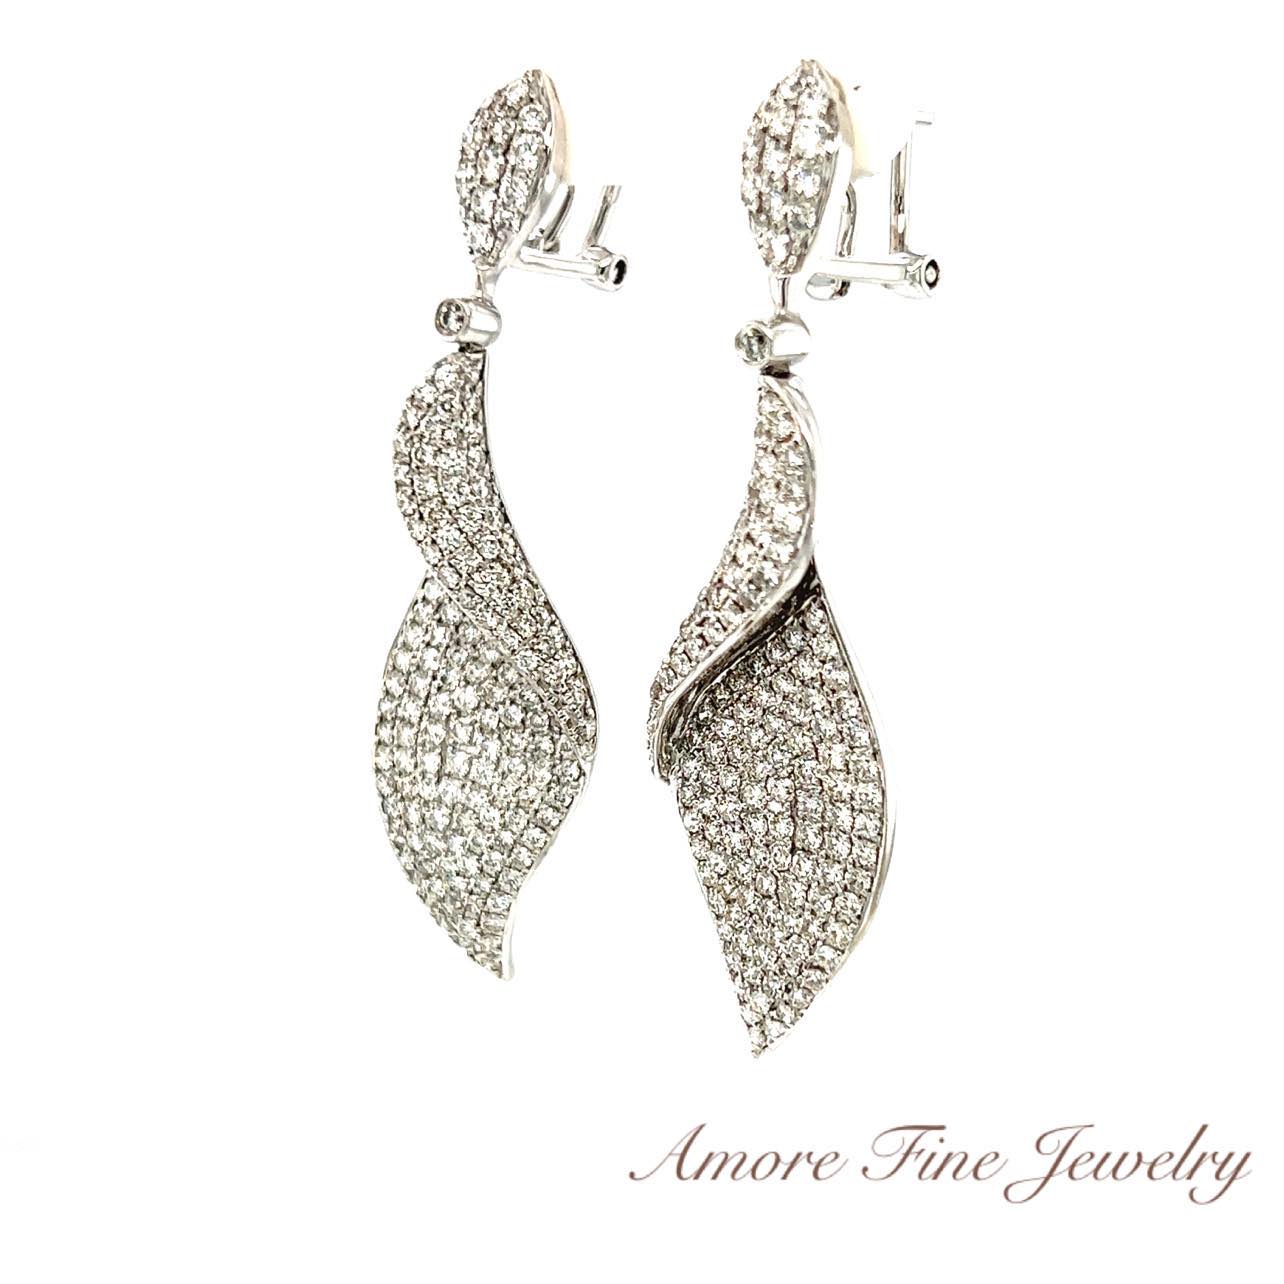 Pave Diamond Earrings In 14kt White Gold